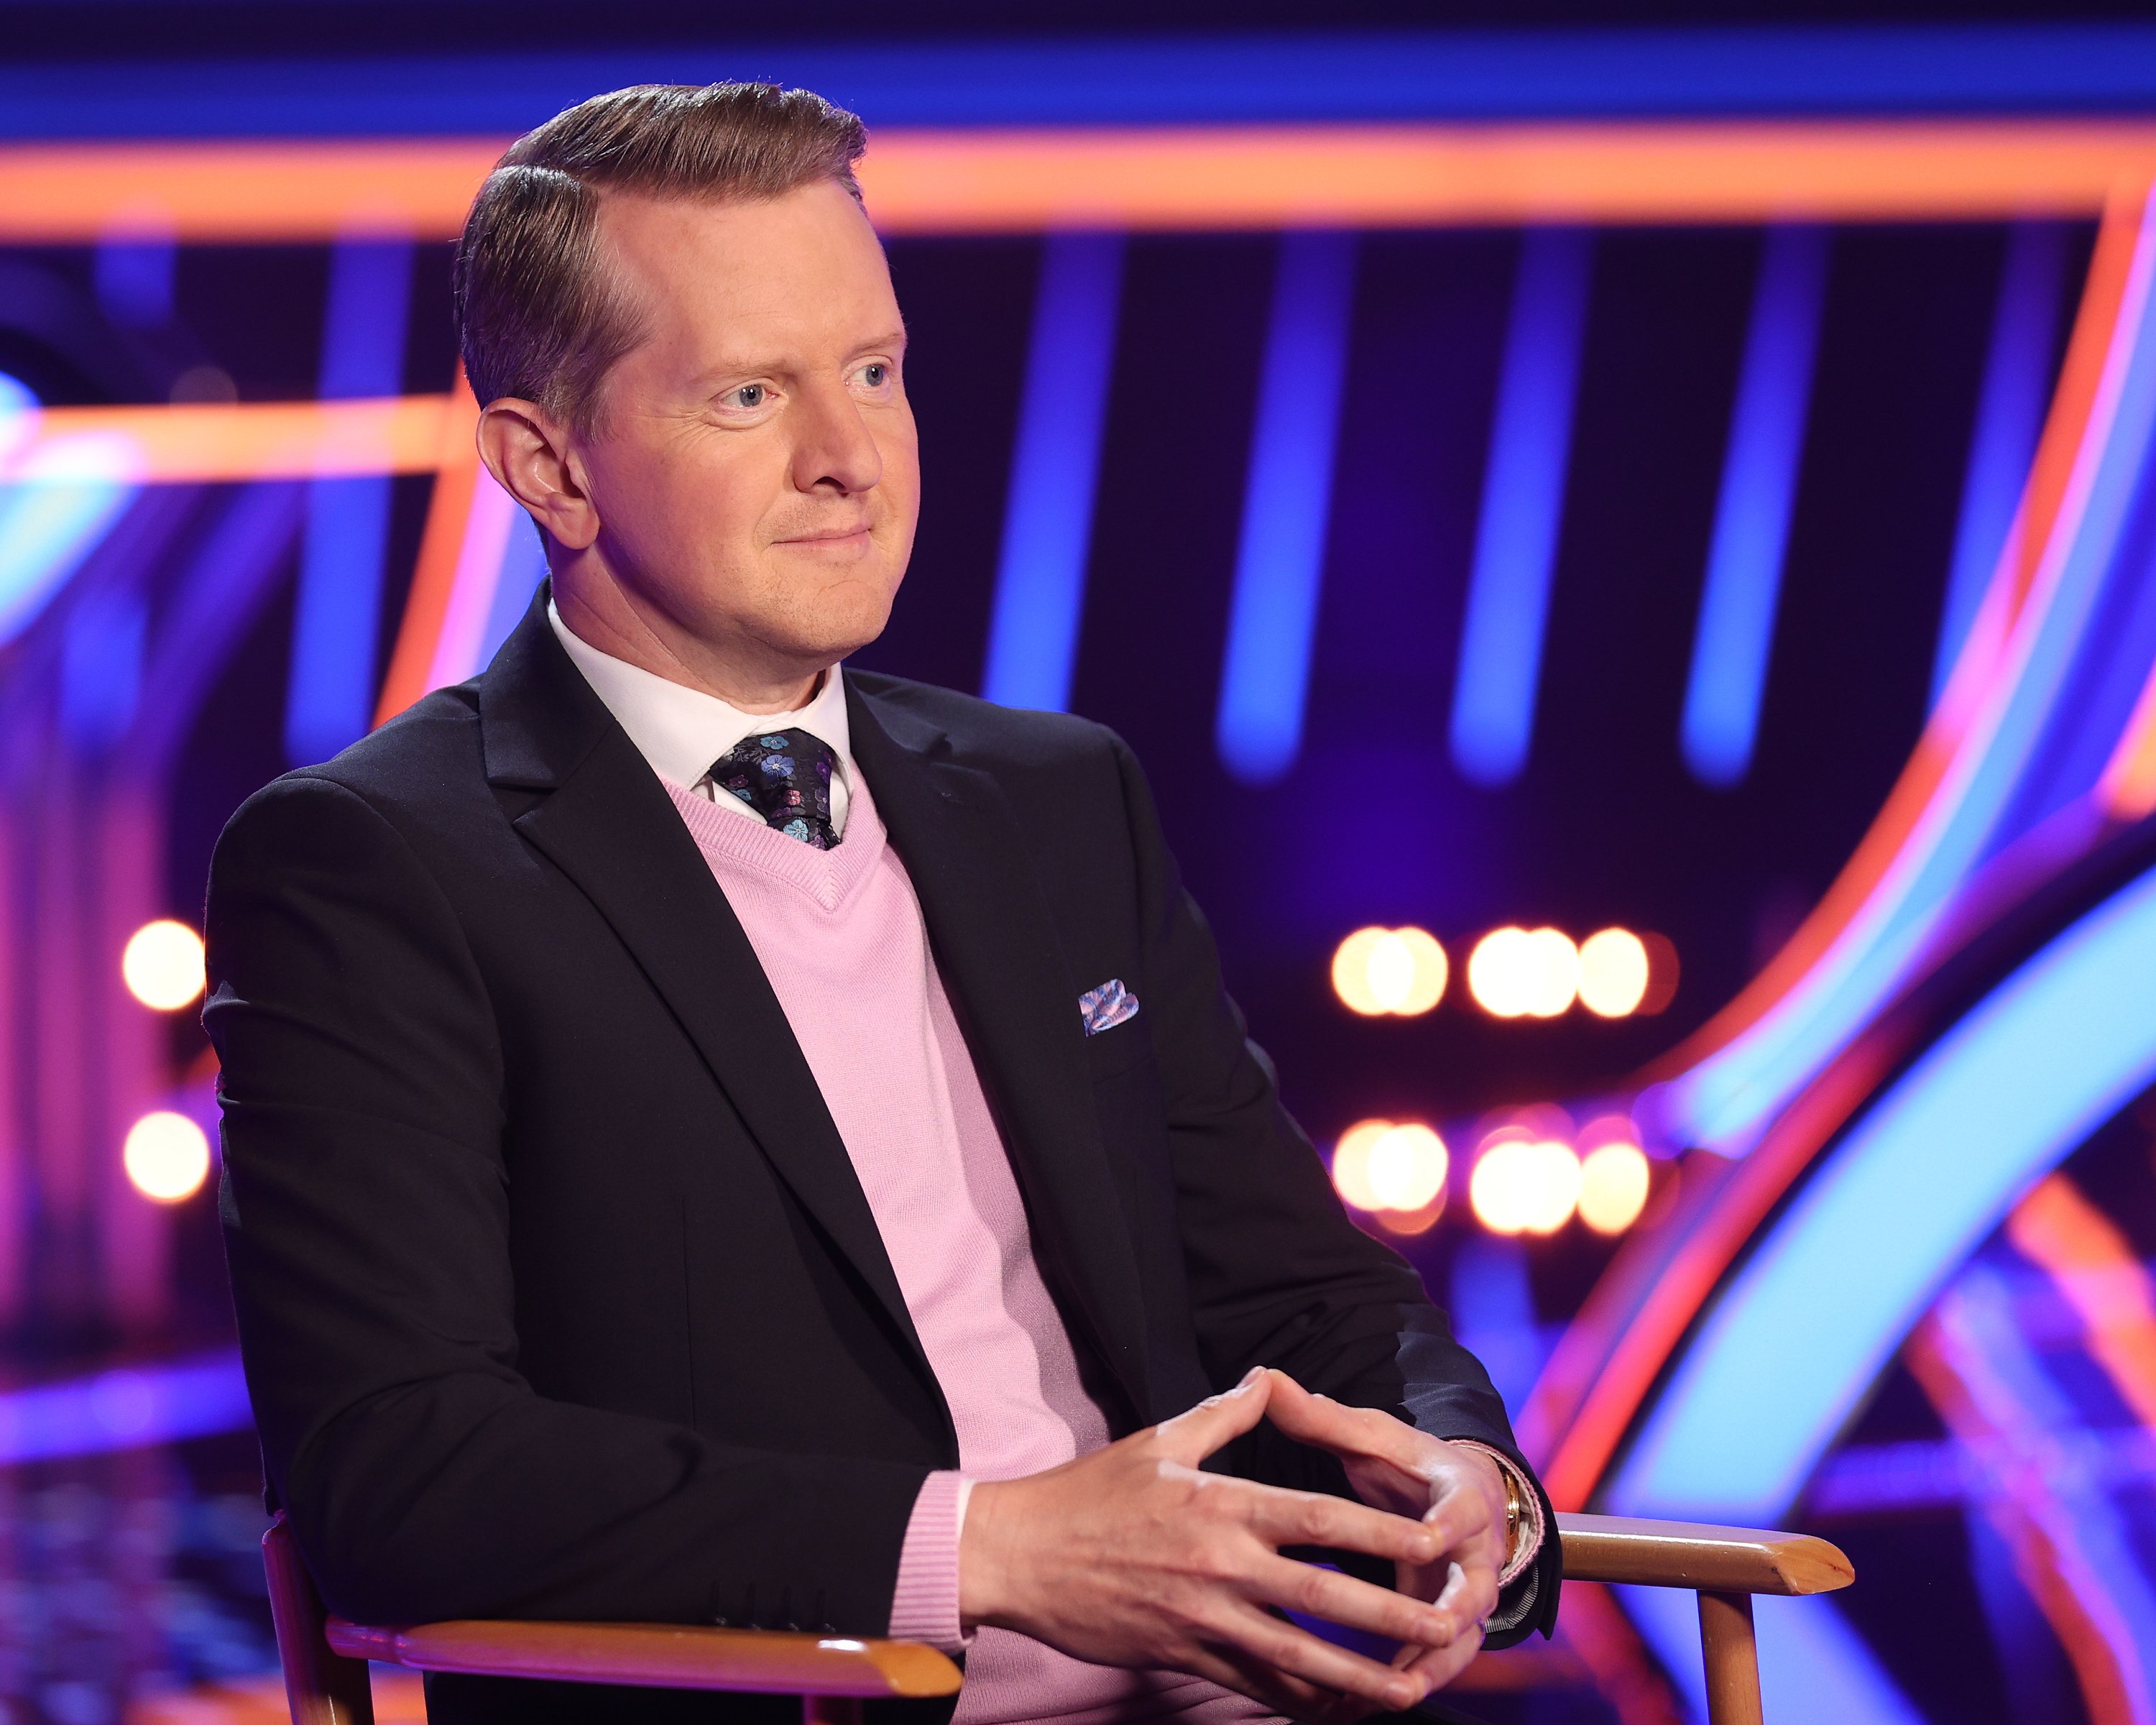 Ken Jennings on the set of ABC's "The Chase" on May 6, 2021 | Source: Getty Images